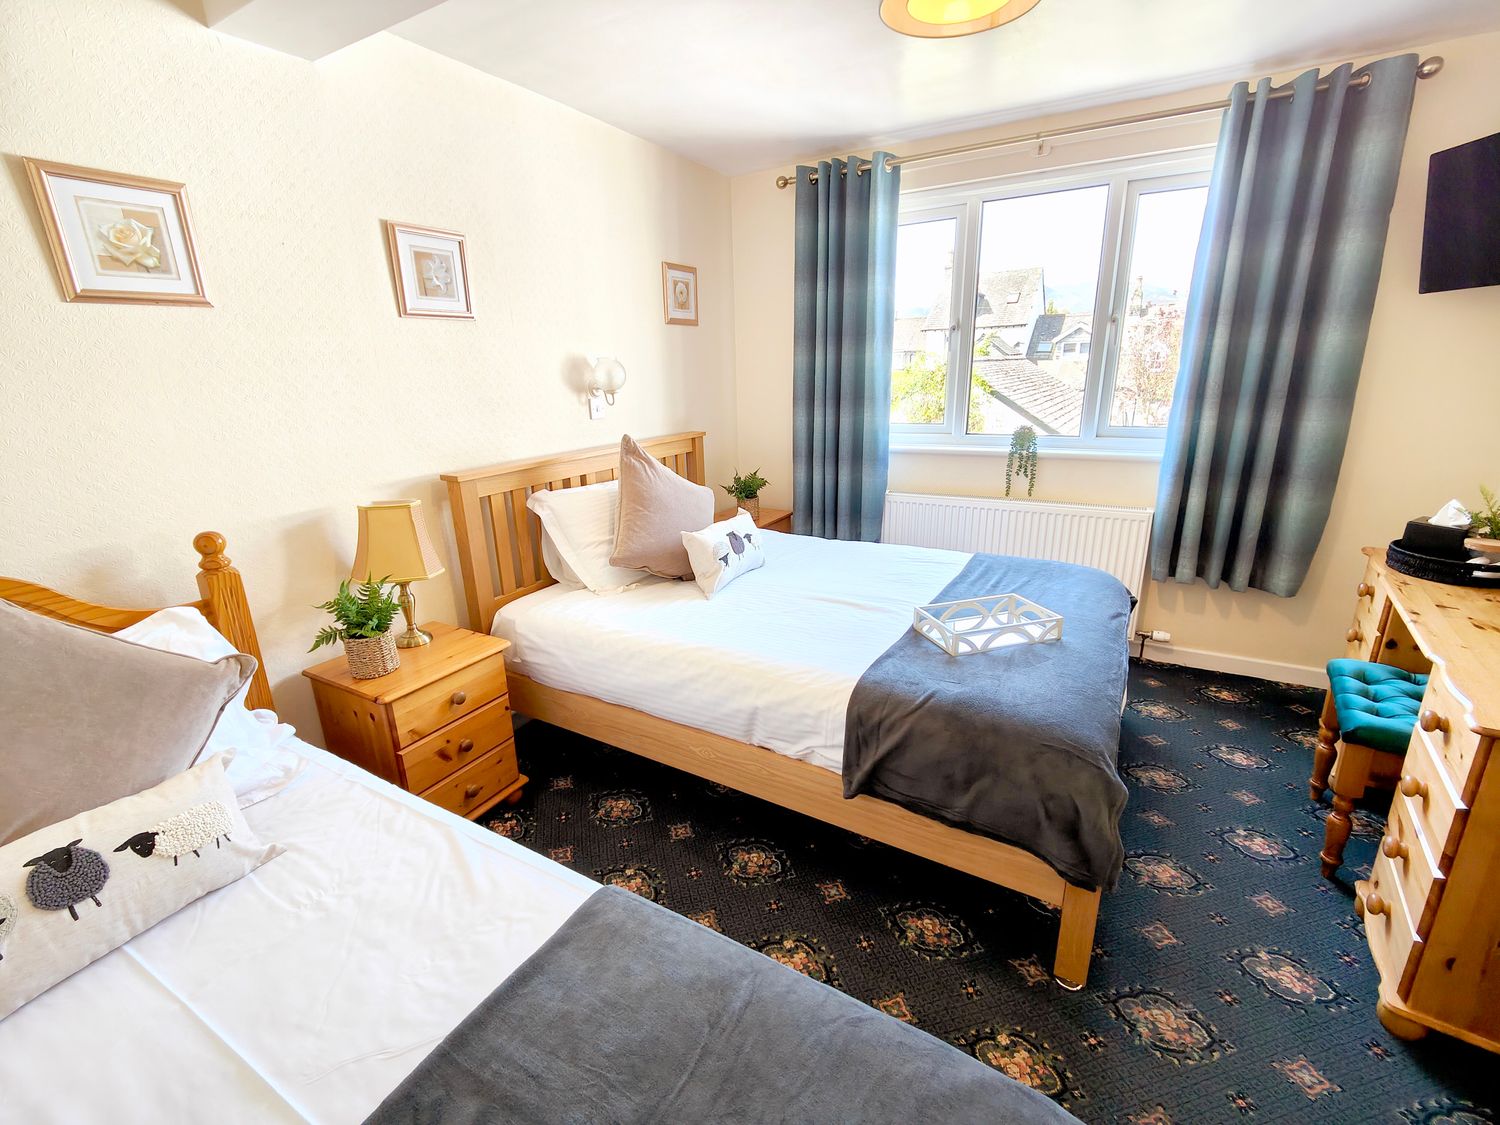 The Paddock in Keswick, Cumbria. In a National Park. En-suite bedrooms. Off-road parking. Near lake.